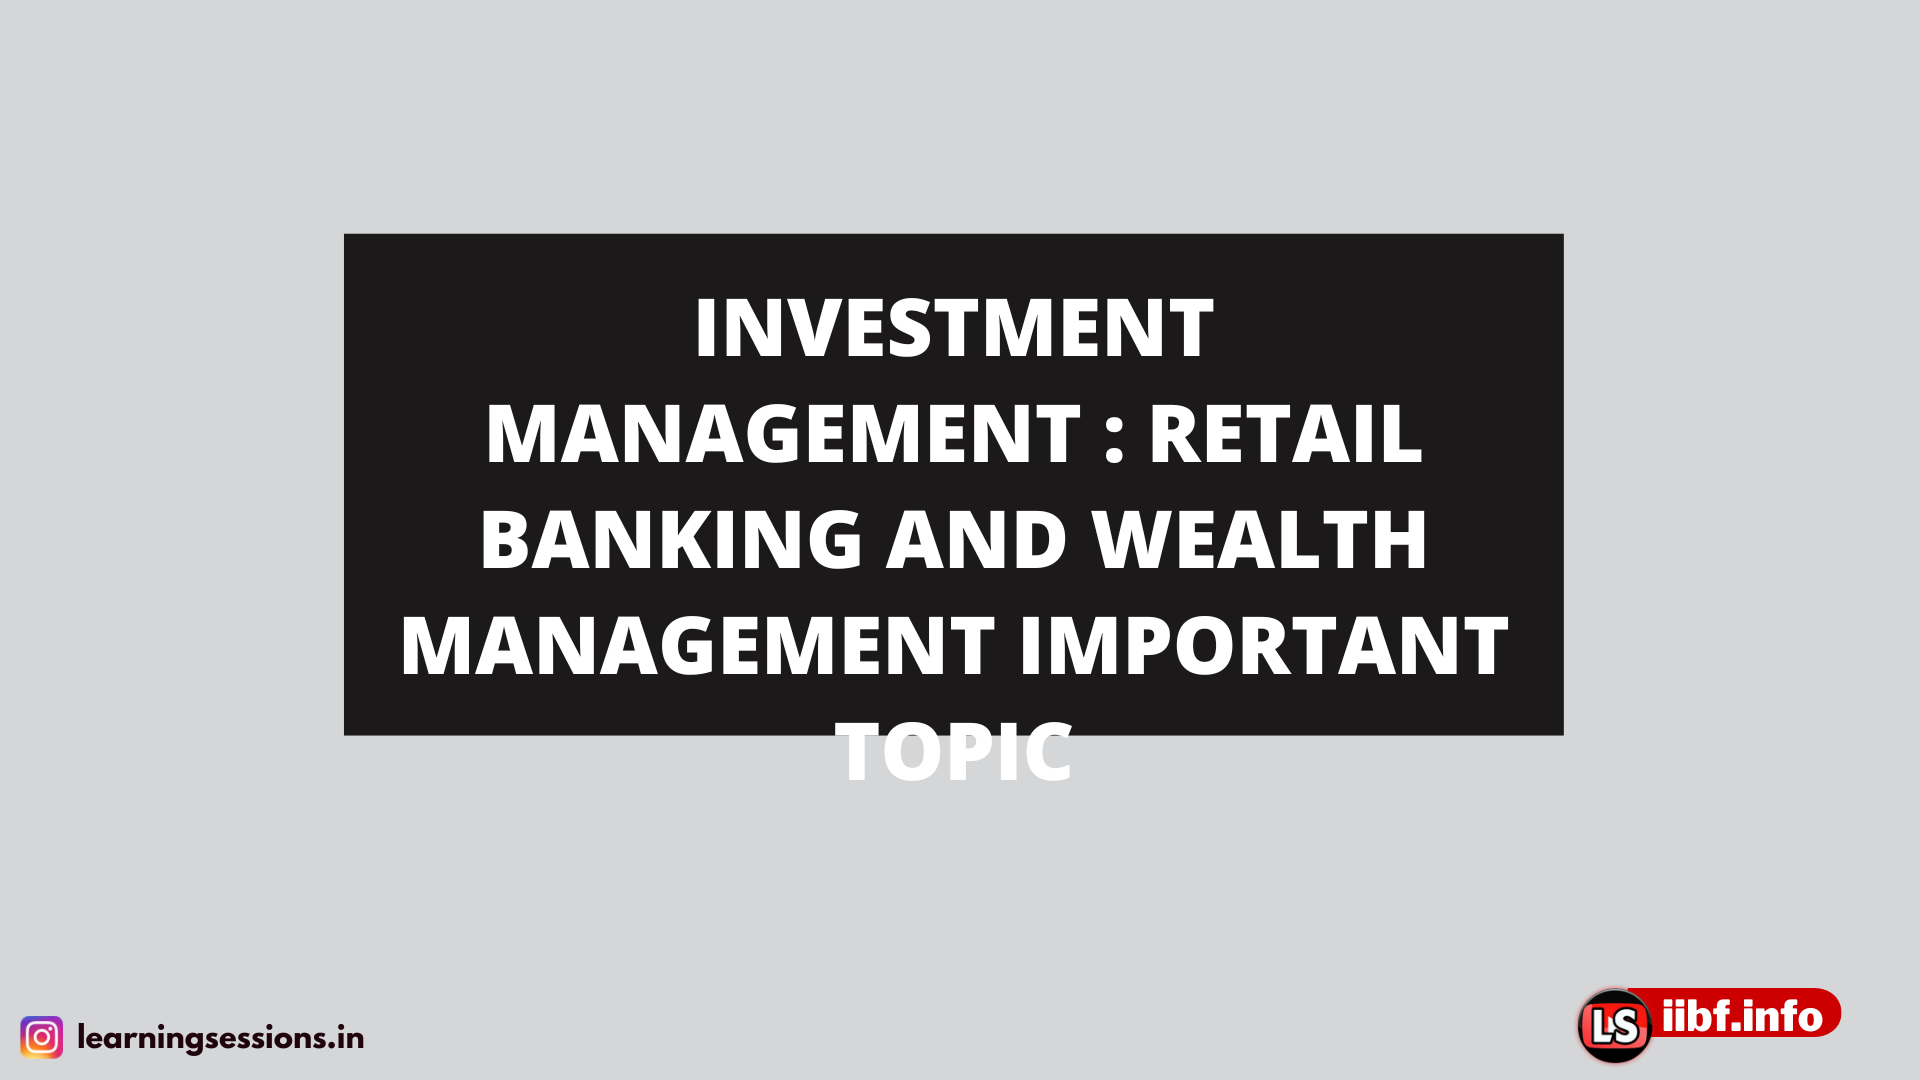 INVESTMENT MANAGEMENT : RETAIL BANKING AND WEALTH MANAGEMENT IMPORTANT TOPIC